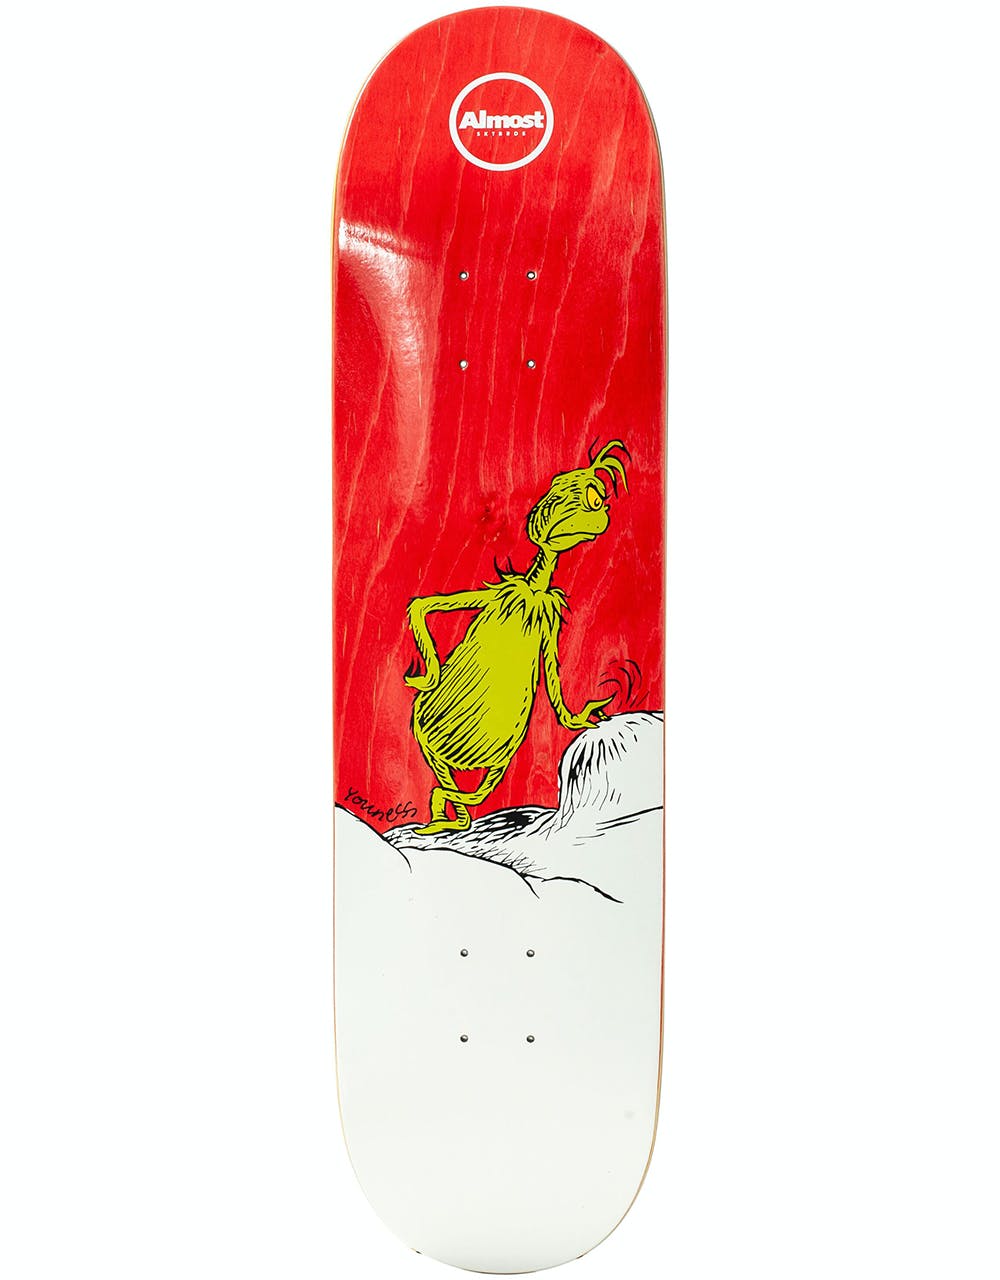 Almost x The Grinch Youness R7 Skateboard Deck - 8.25"